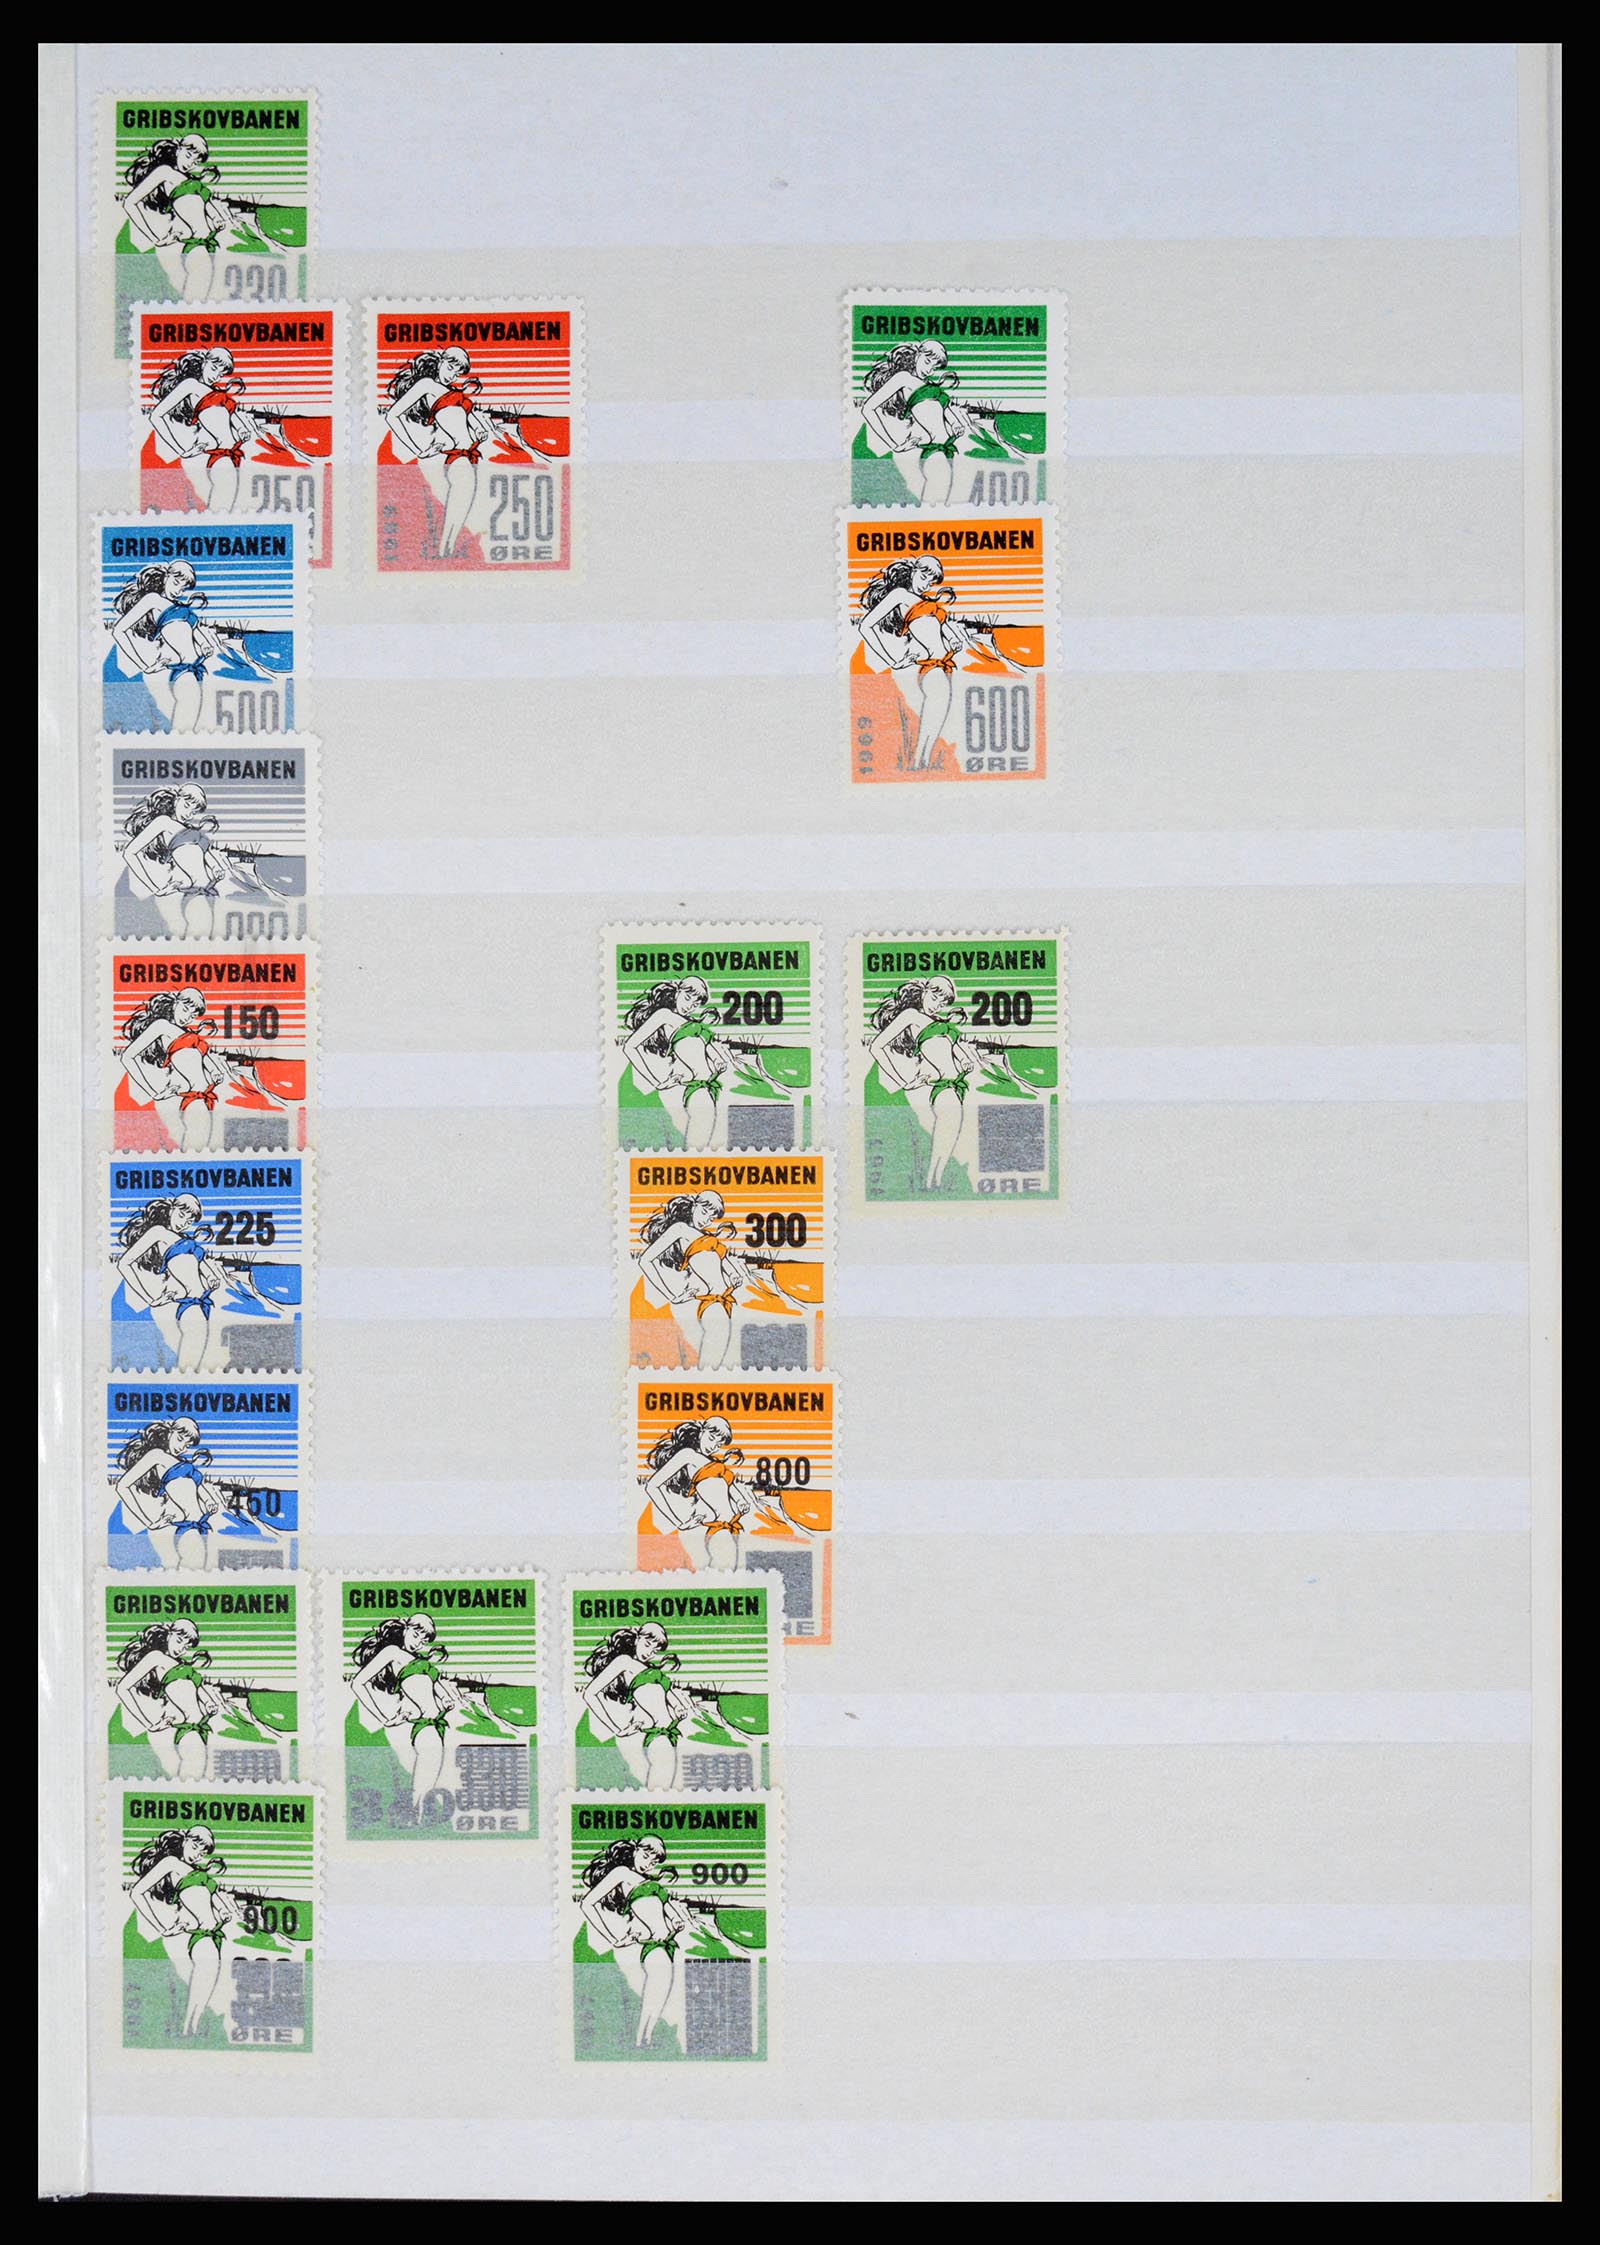 36982 019 - Stamp collection 36982 Denmark railroad stamps.